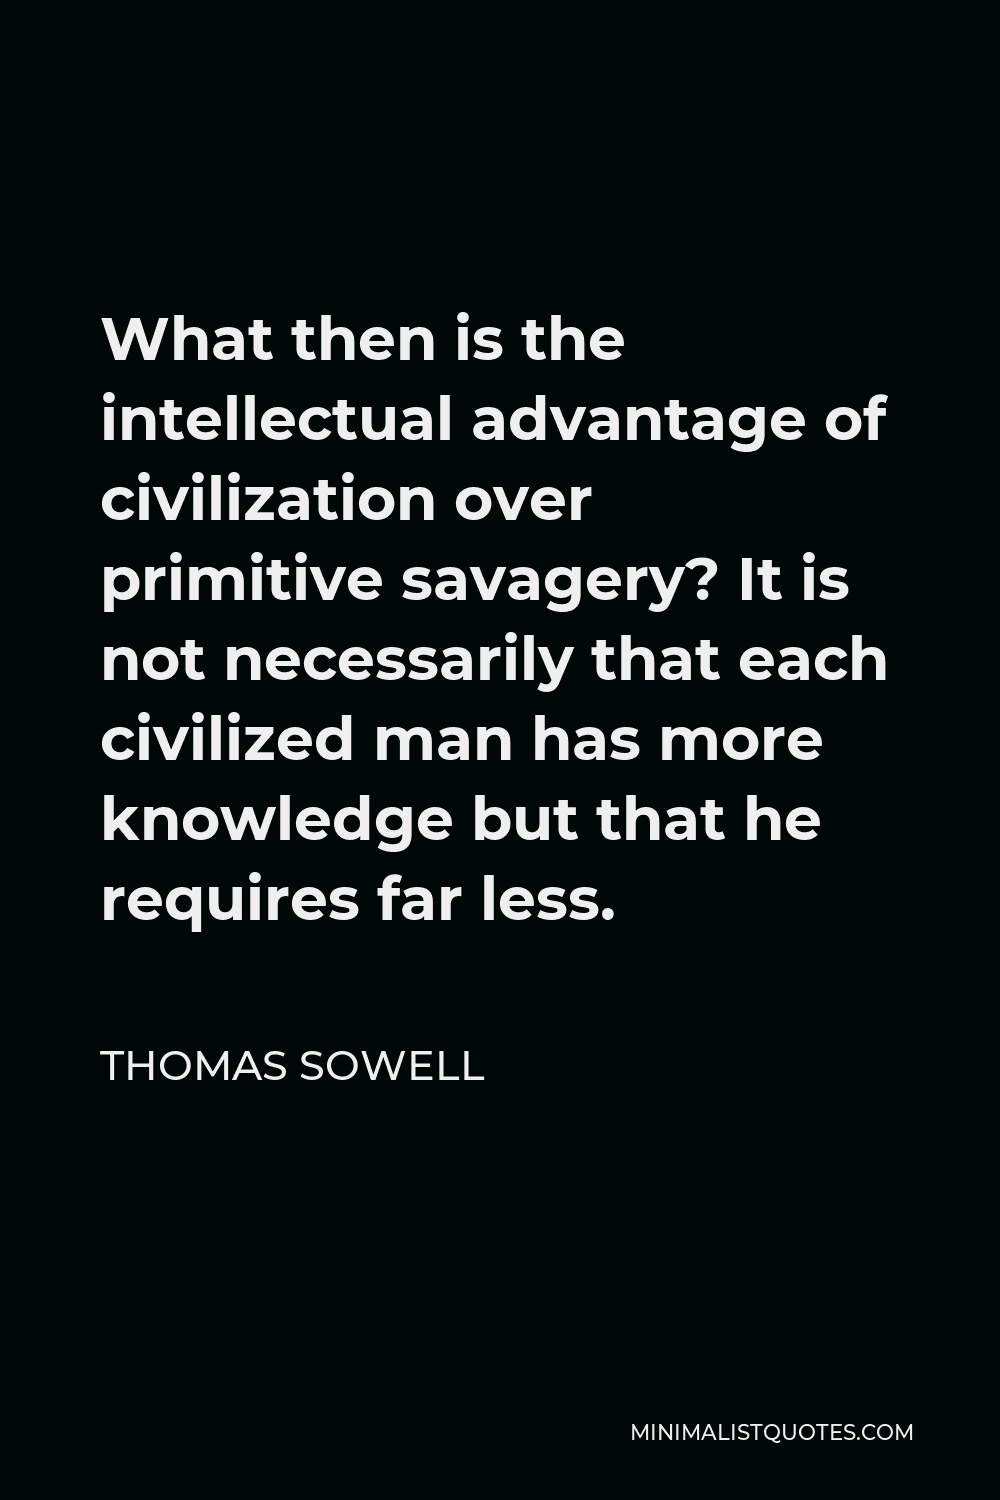 Thomas Sowell Quote - What then is the intellectual advantage of civilization over primitive savagery? It is not necessarily that each civilized man has more knowledge but that he requires far less.